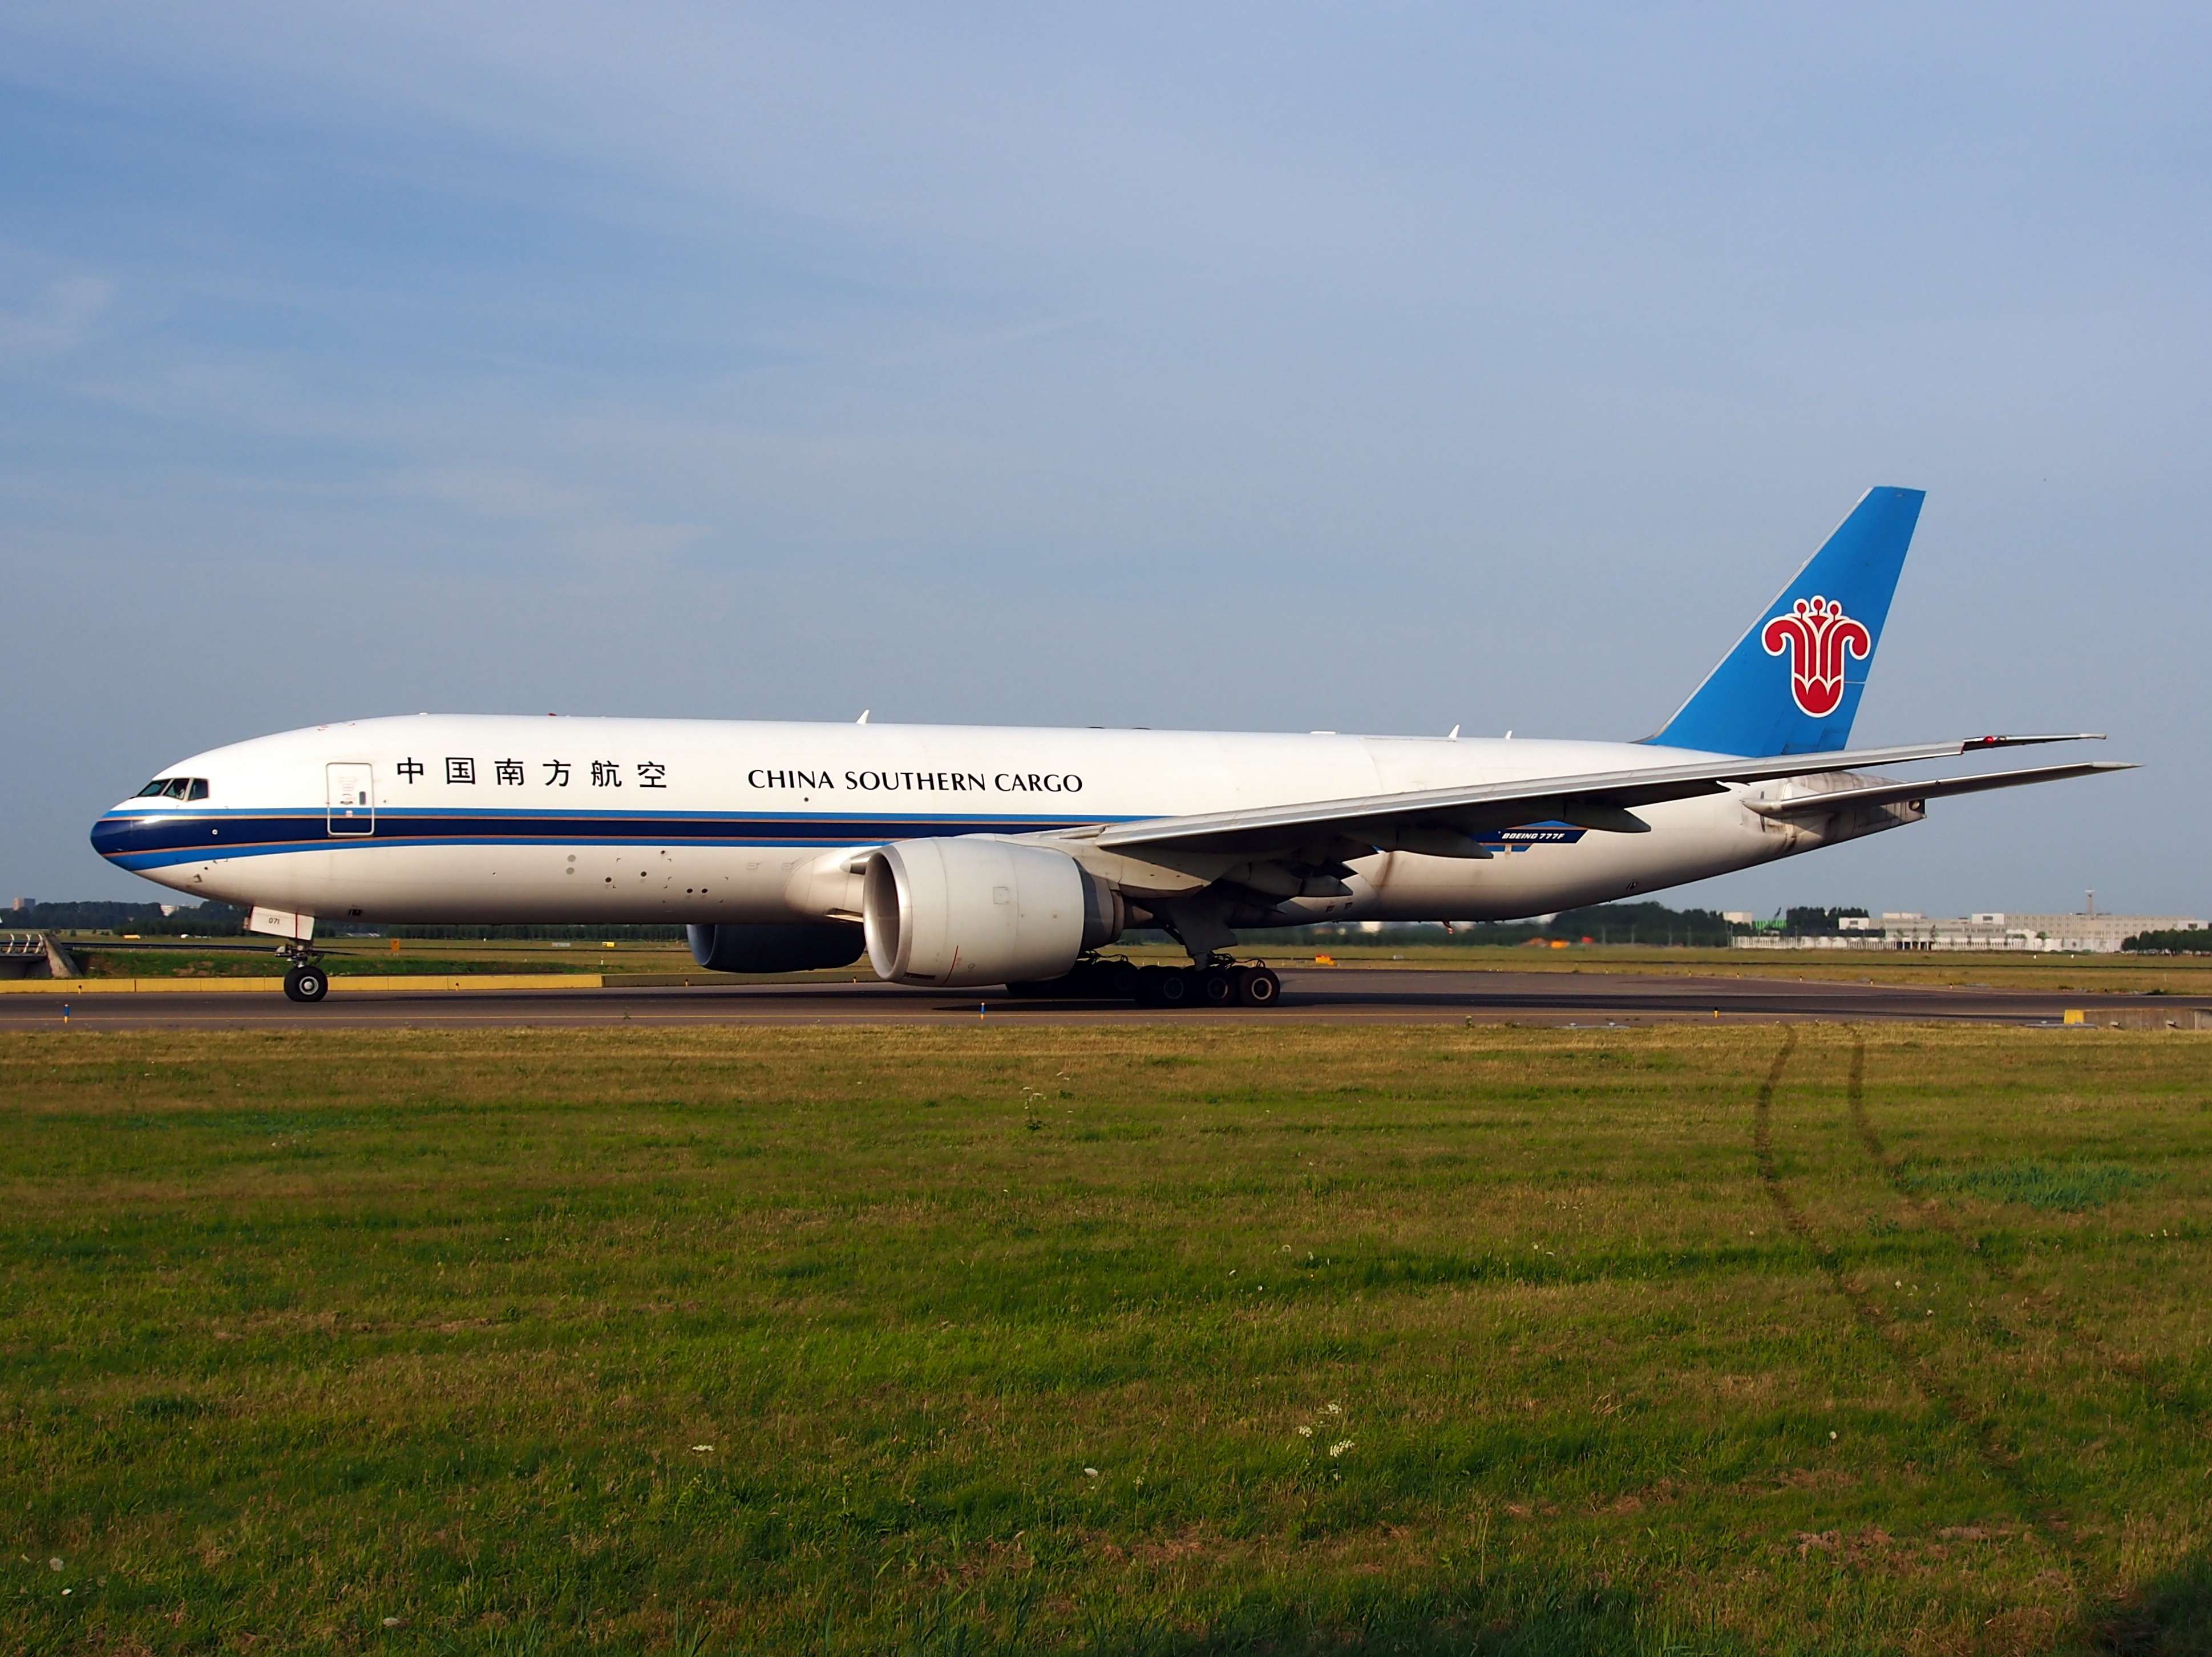 B-2071 China Southern Airlines Boeing 777-F1B - cn 37309, taxiing 22july2013 pic-007